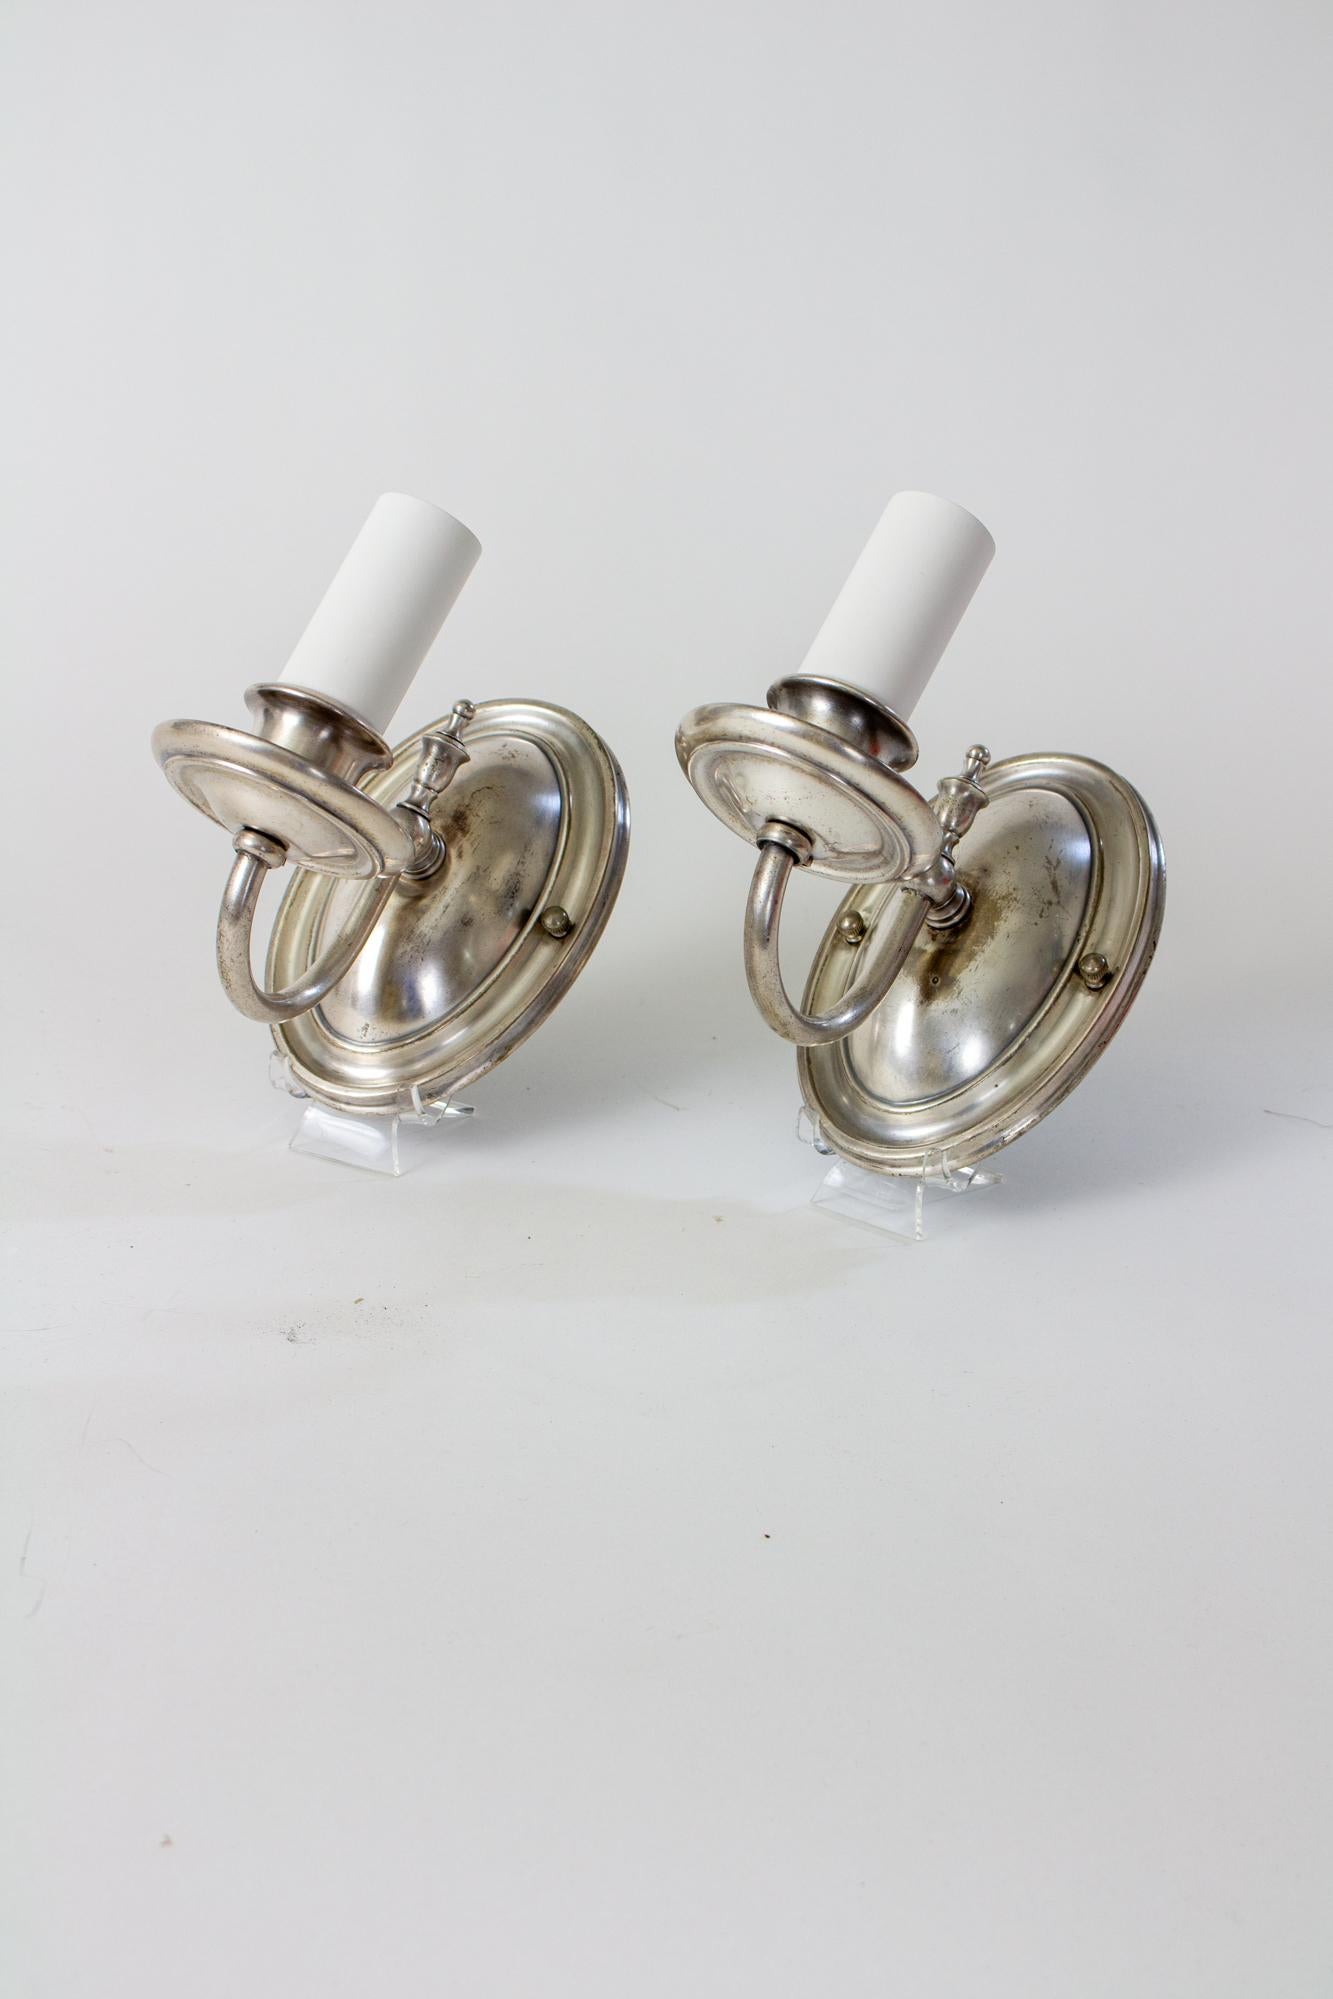 Revival Early 20th Century Nickel Plated Sconces - a Pair